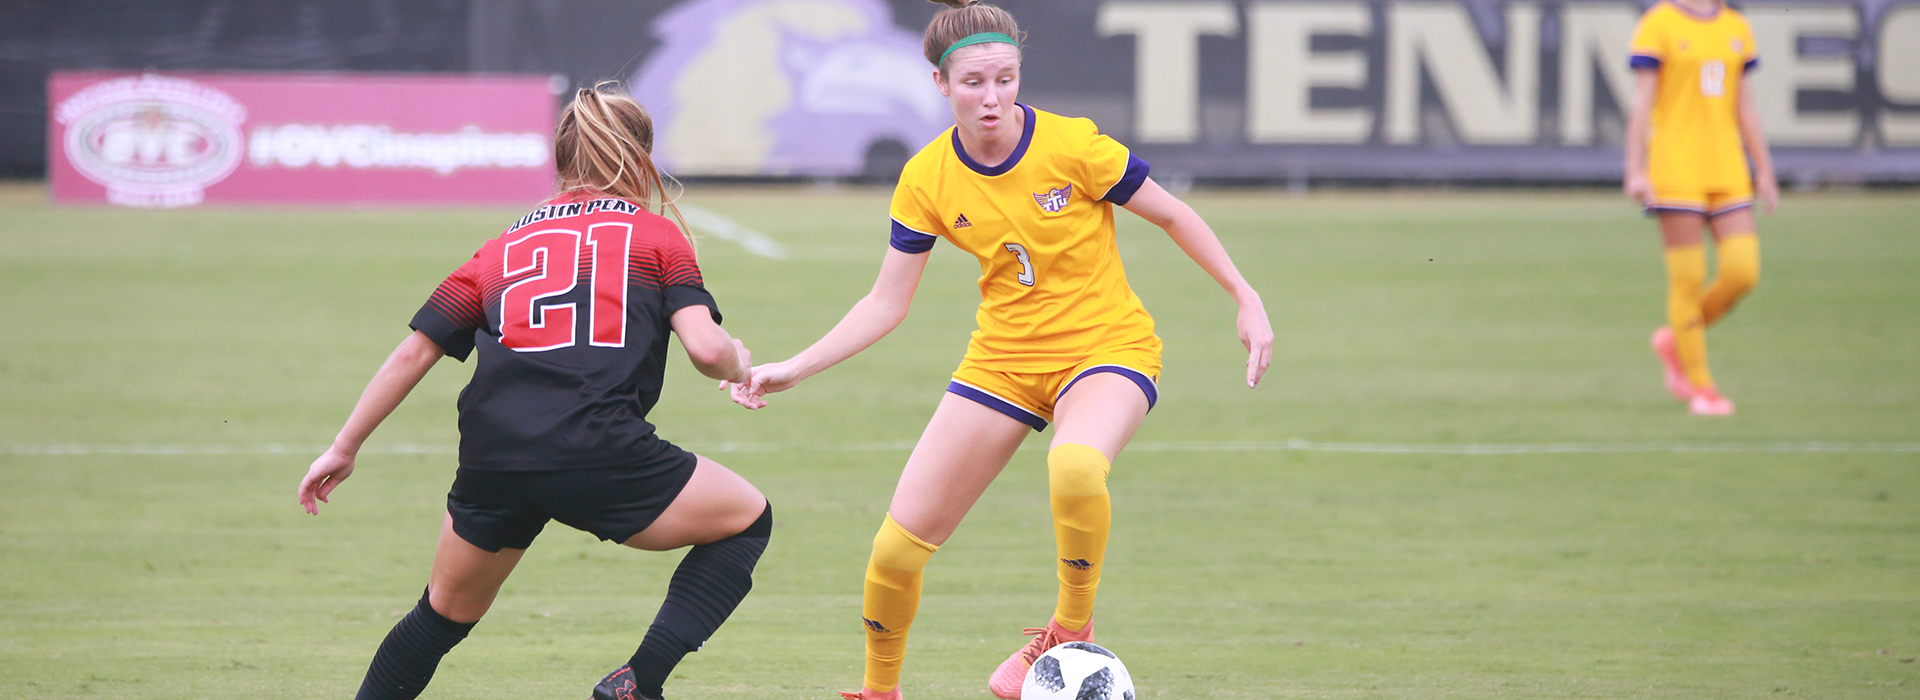 Tech scores late in 1-0 victory at Morehead State